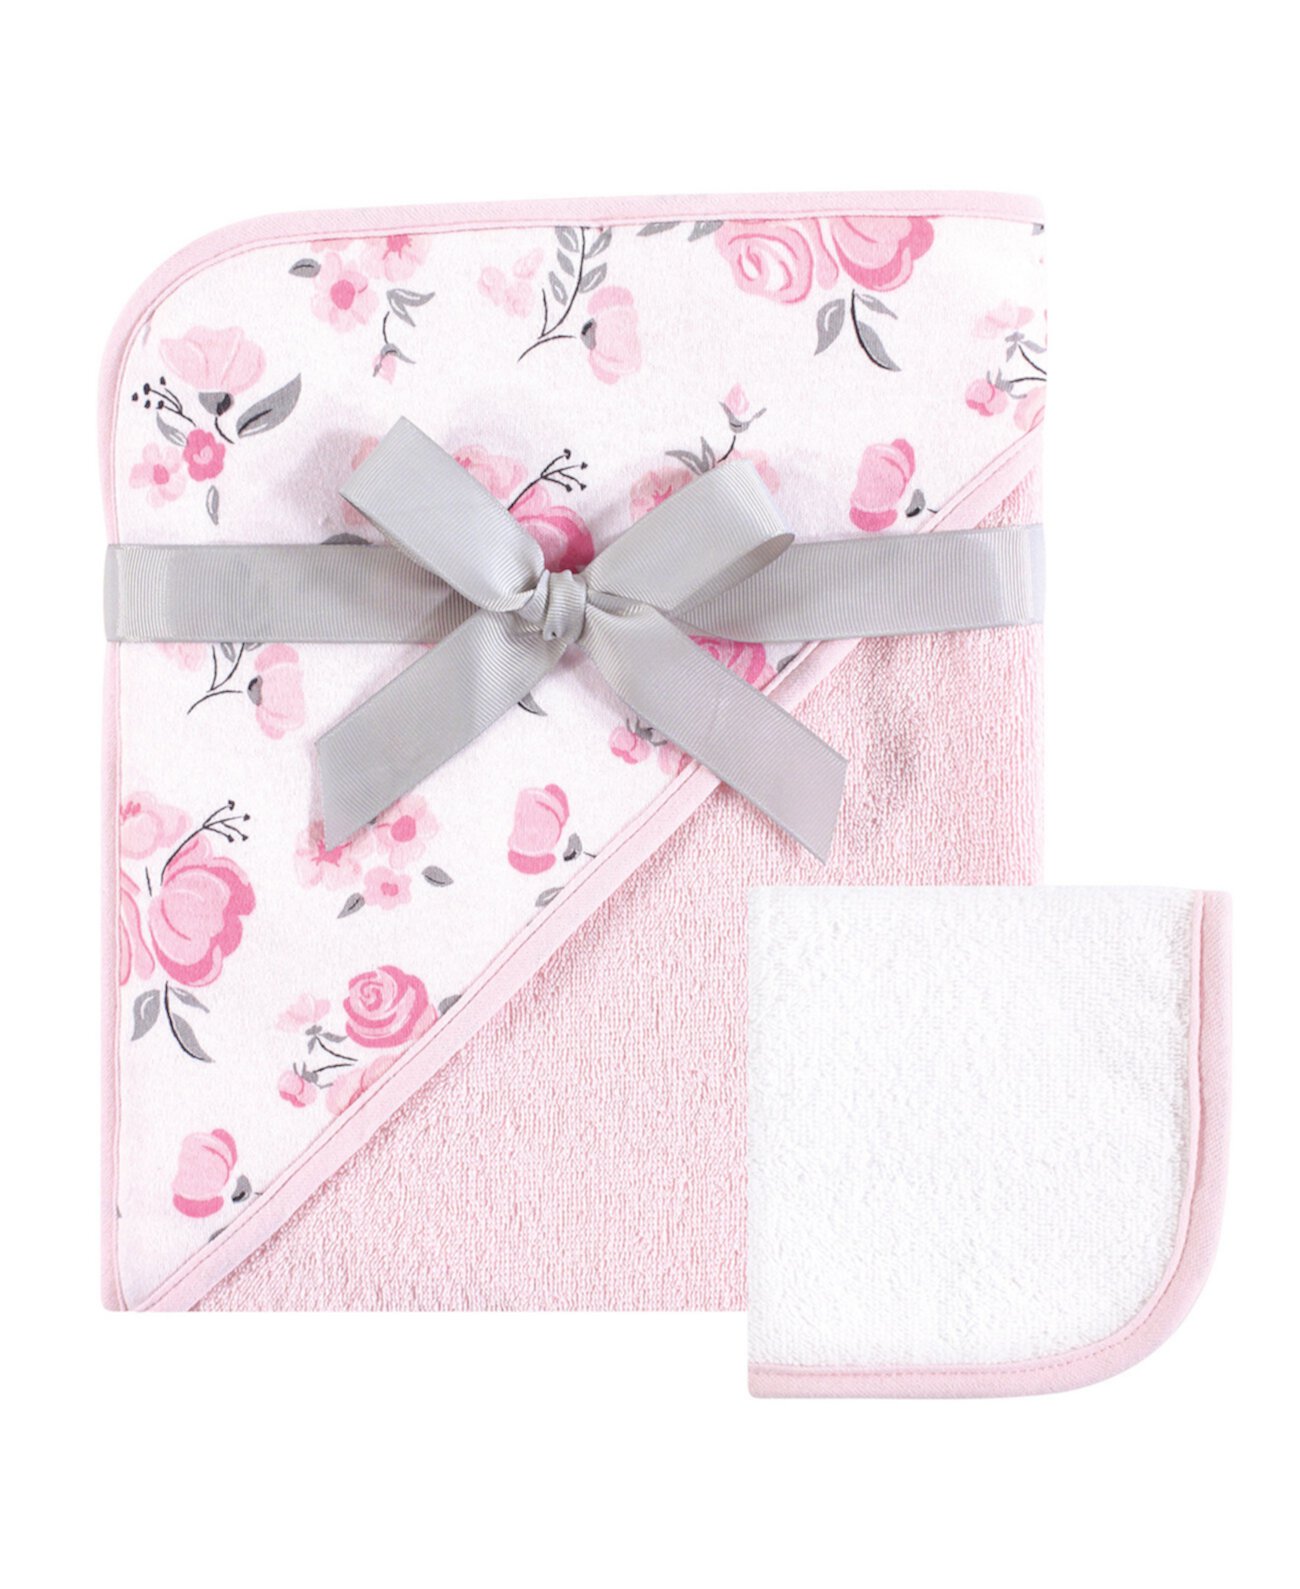 Hudson Baby Unisex Baby Hooded Towel and Washcloth, Pink Floral 2-Piece Set, One Size Baby Vision